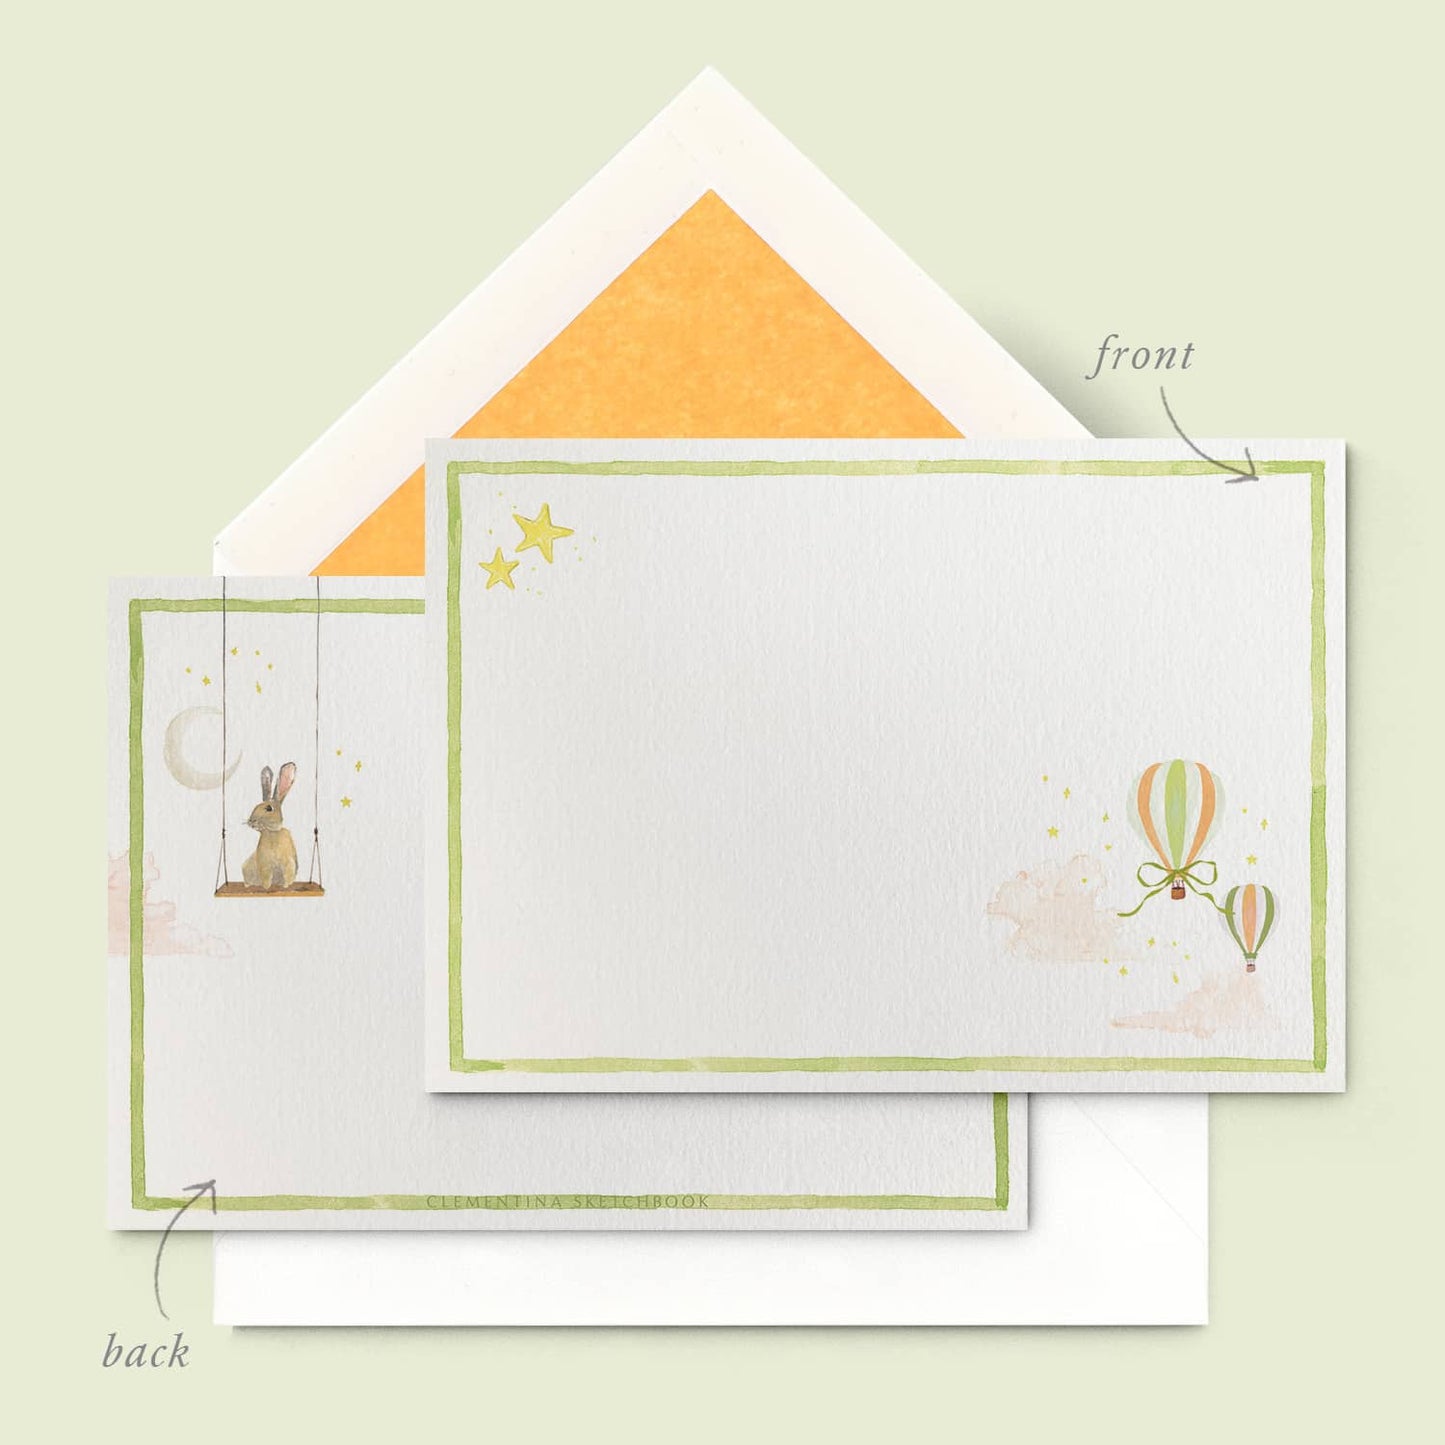 Hot Air Balloons Stationery Cards - Green